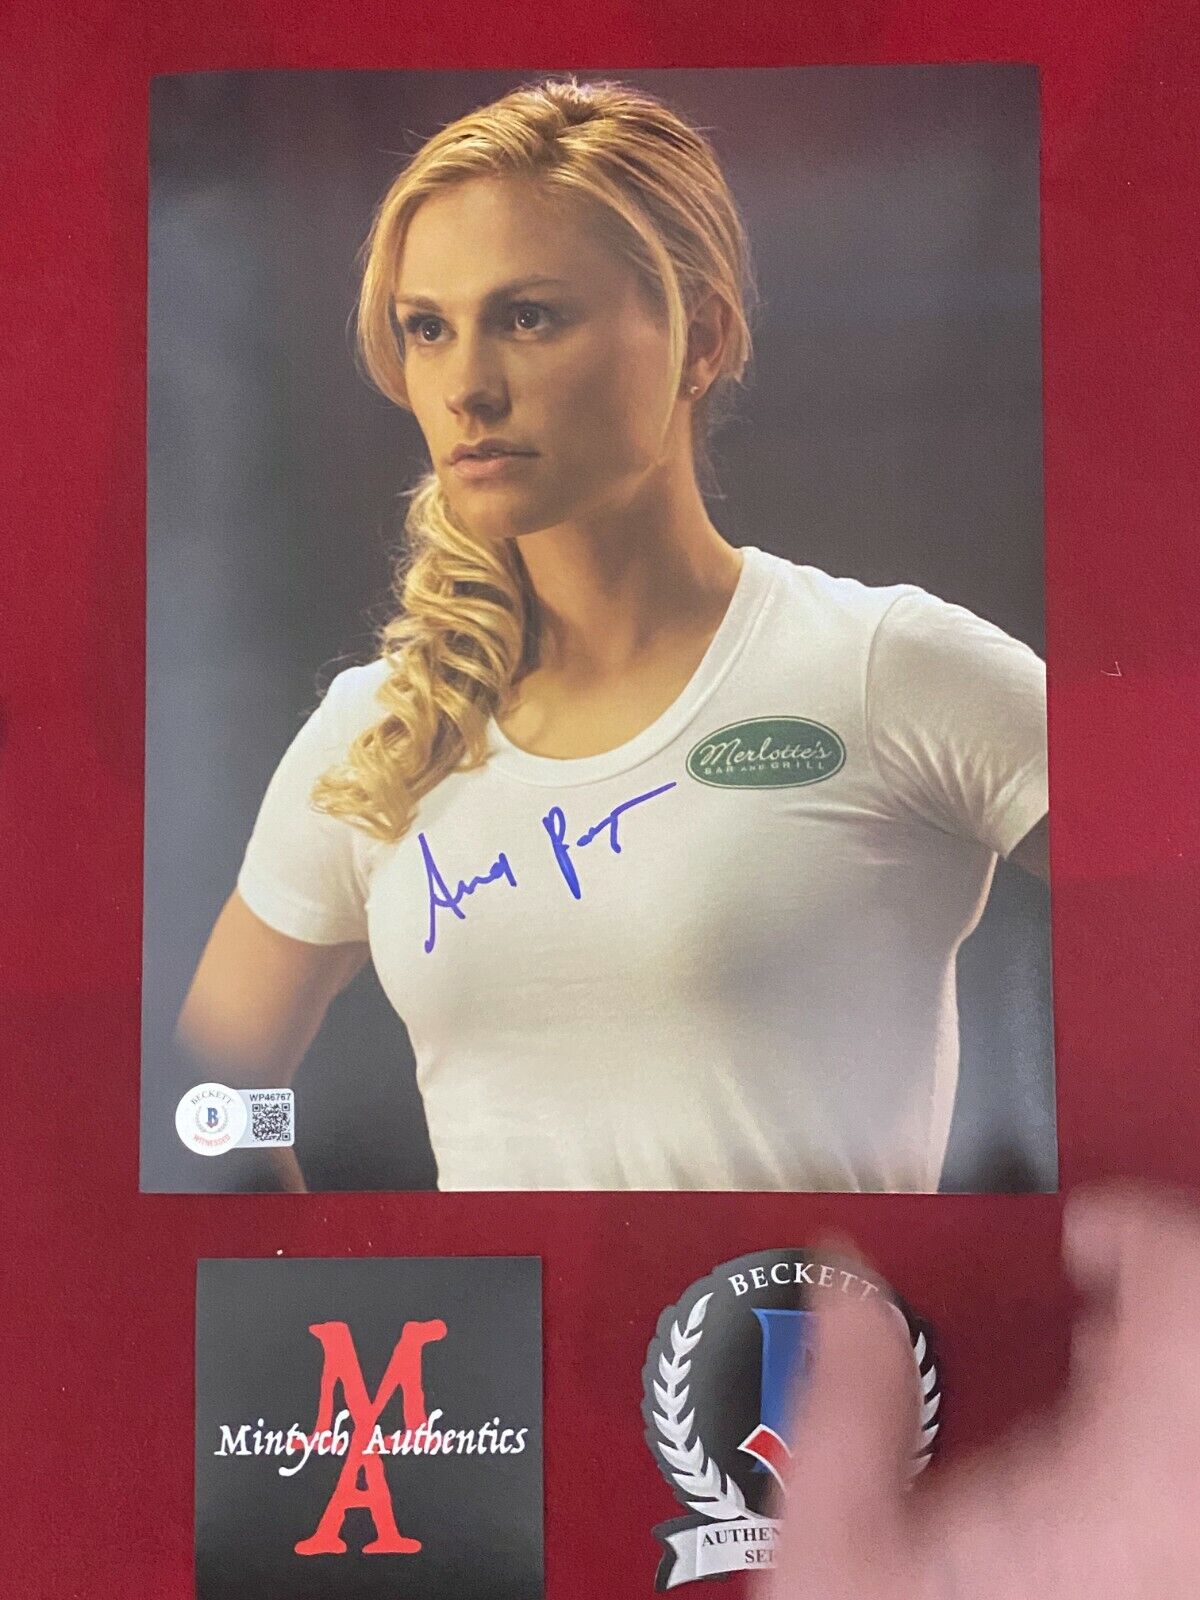 ANNA PAQUIN AUTOGRAPHED SIGNED 8x10 Photo Poster painting! TRUE BLOOD! SOOKIE! BECKETT COA!